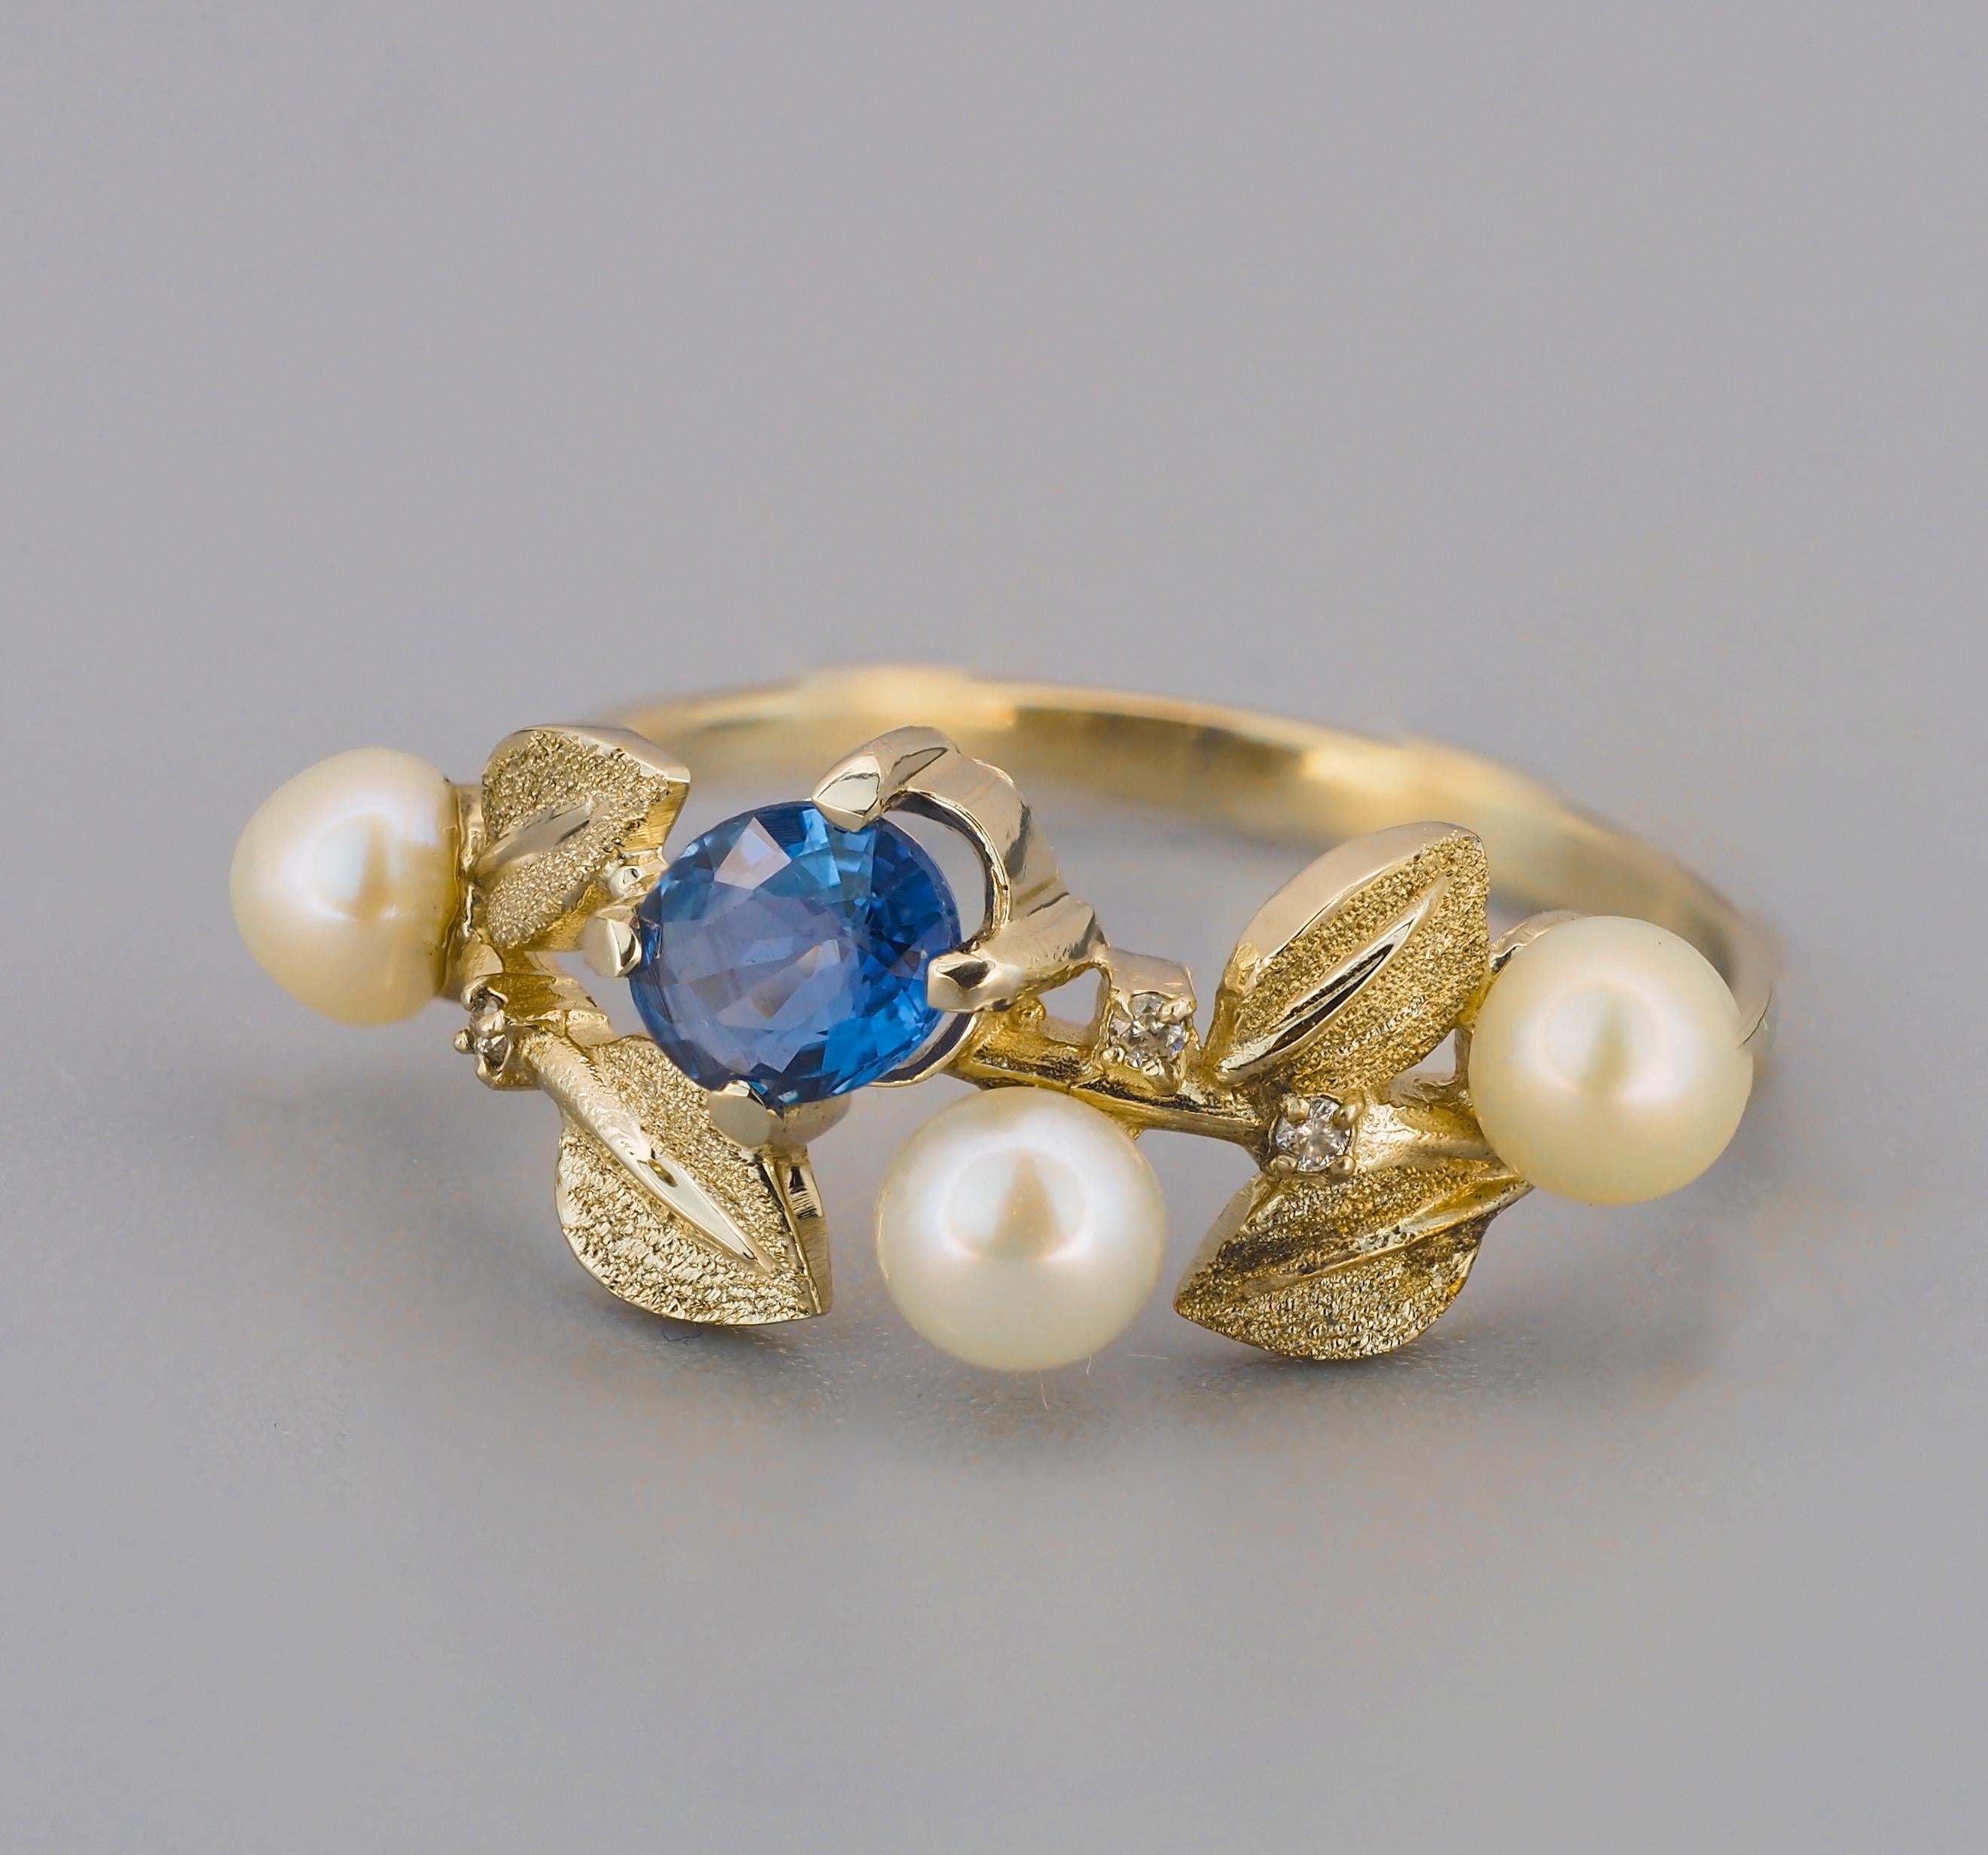 For Sale:  14k Gold Floral Ring with Sapphire, Diamonds and Pearls 2